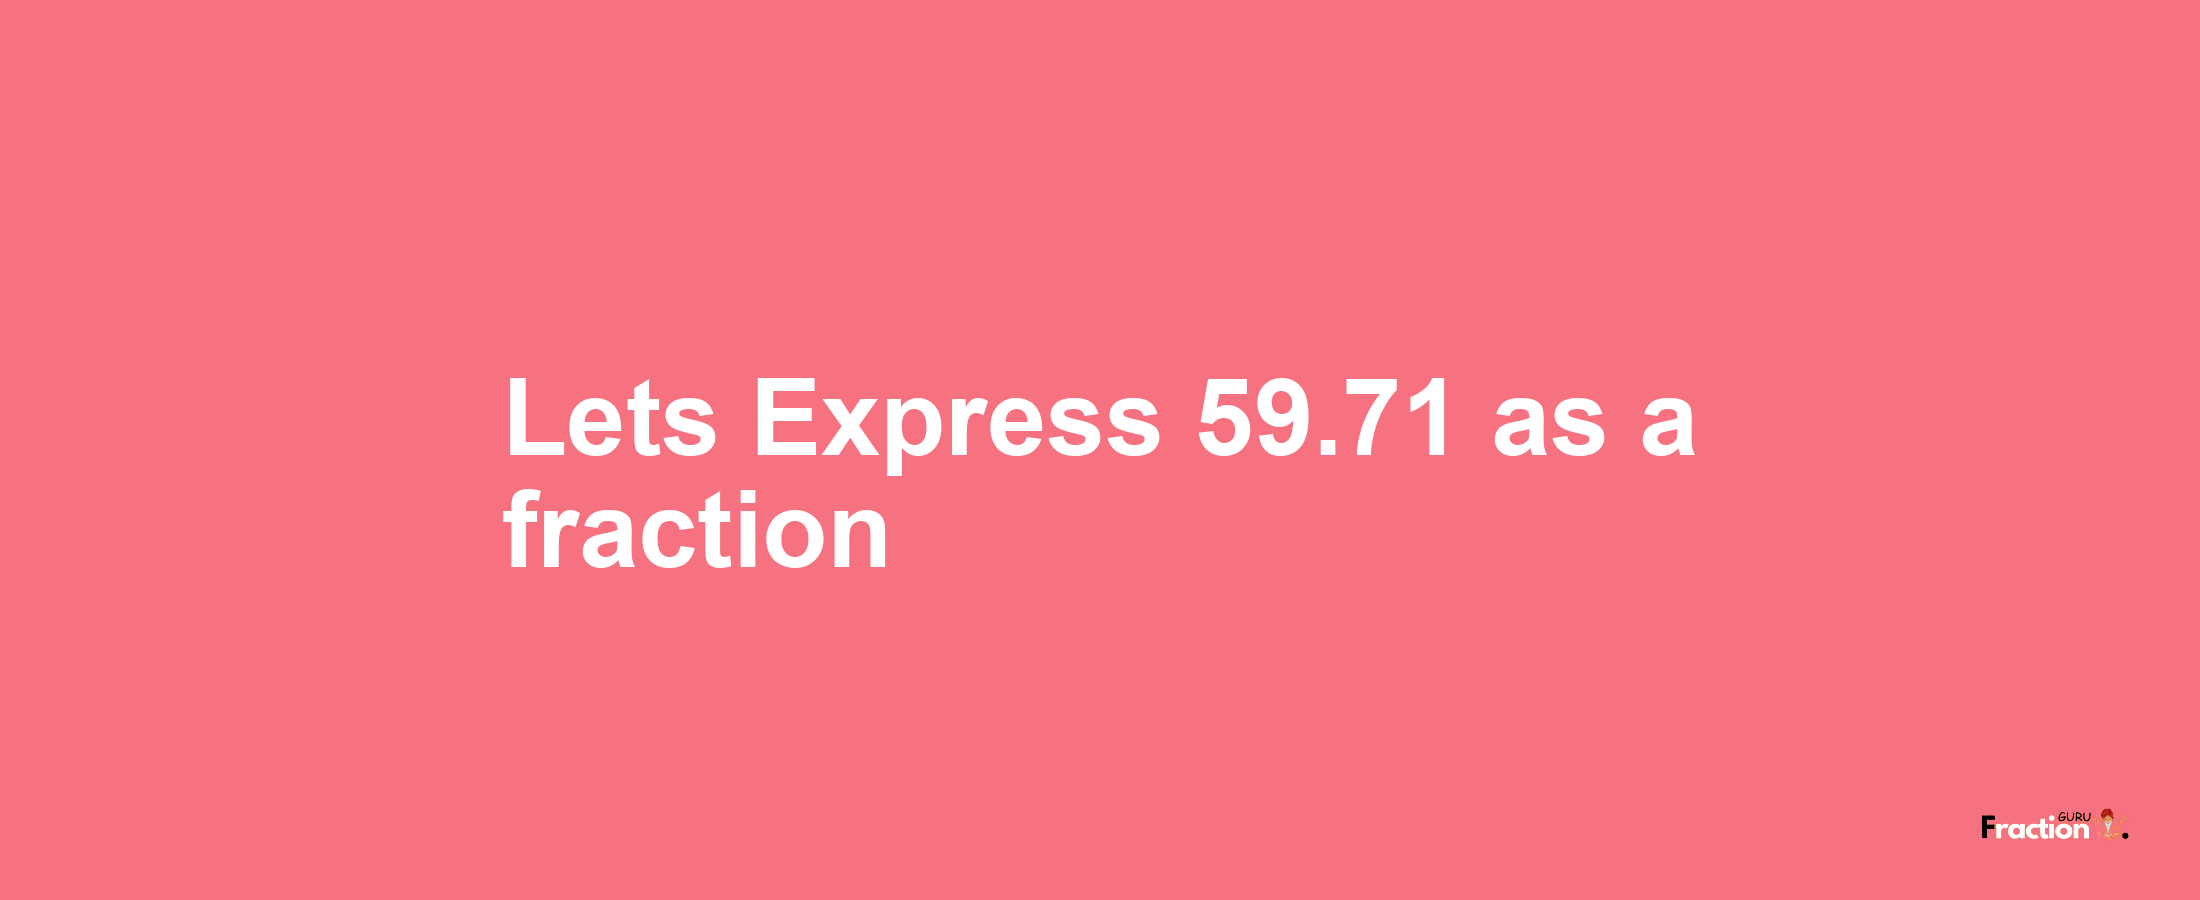 Lets Express 59.71 as afraction